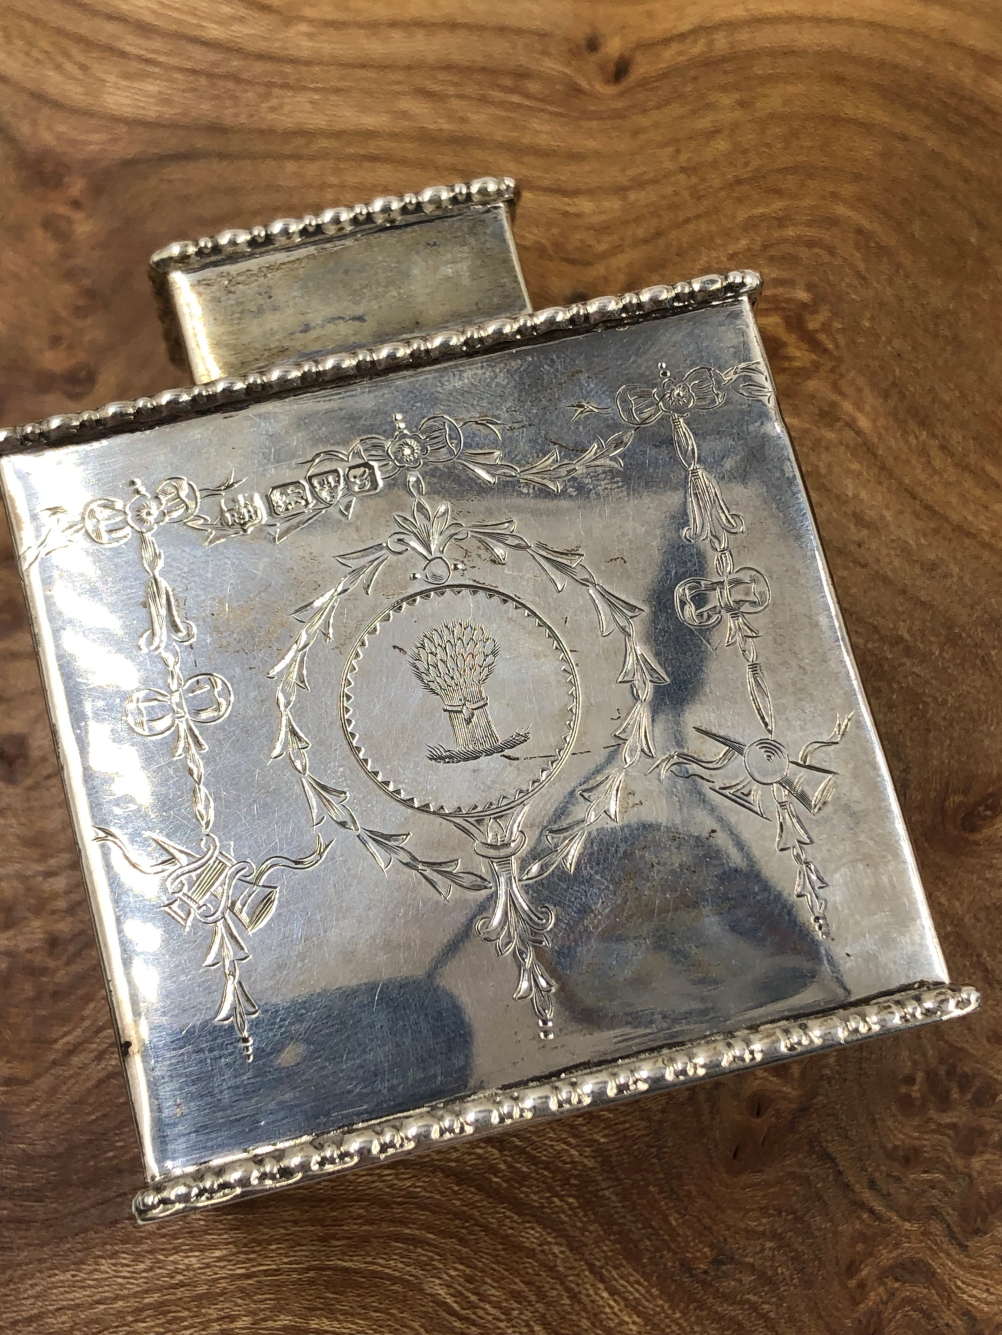 HALLMARKED SILVER TO INCLUDE A TWO HANDLED PORRINGER, AND A REGENCY STYLE SQUARE TEA CADDY DATED - Image 2 of 3